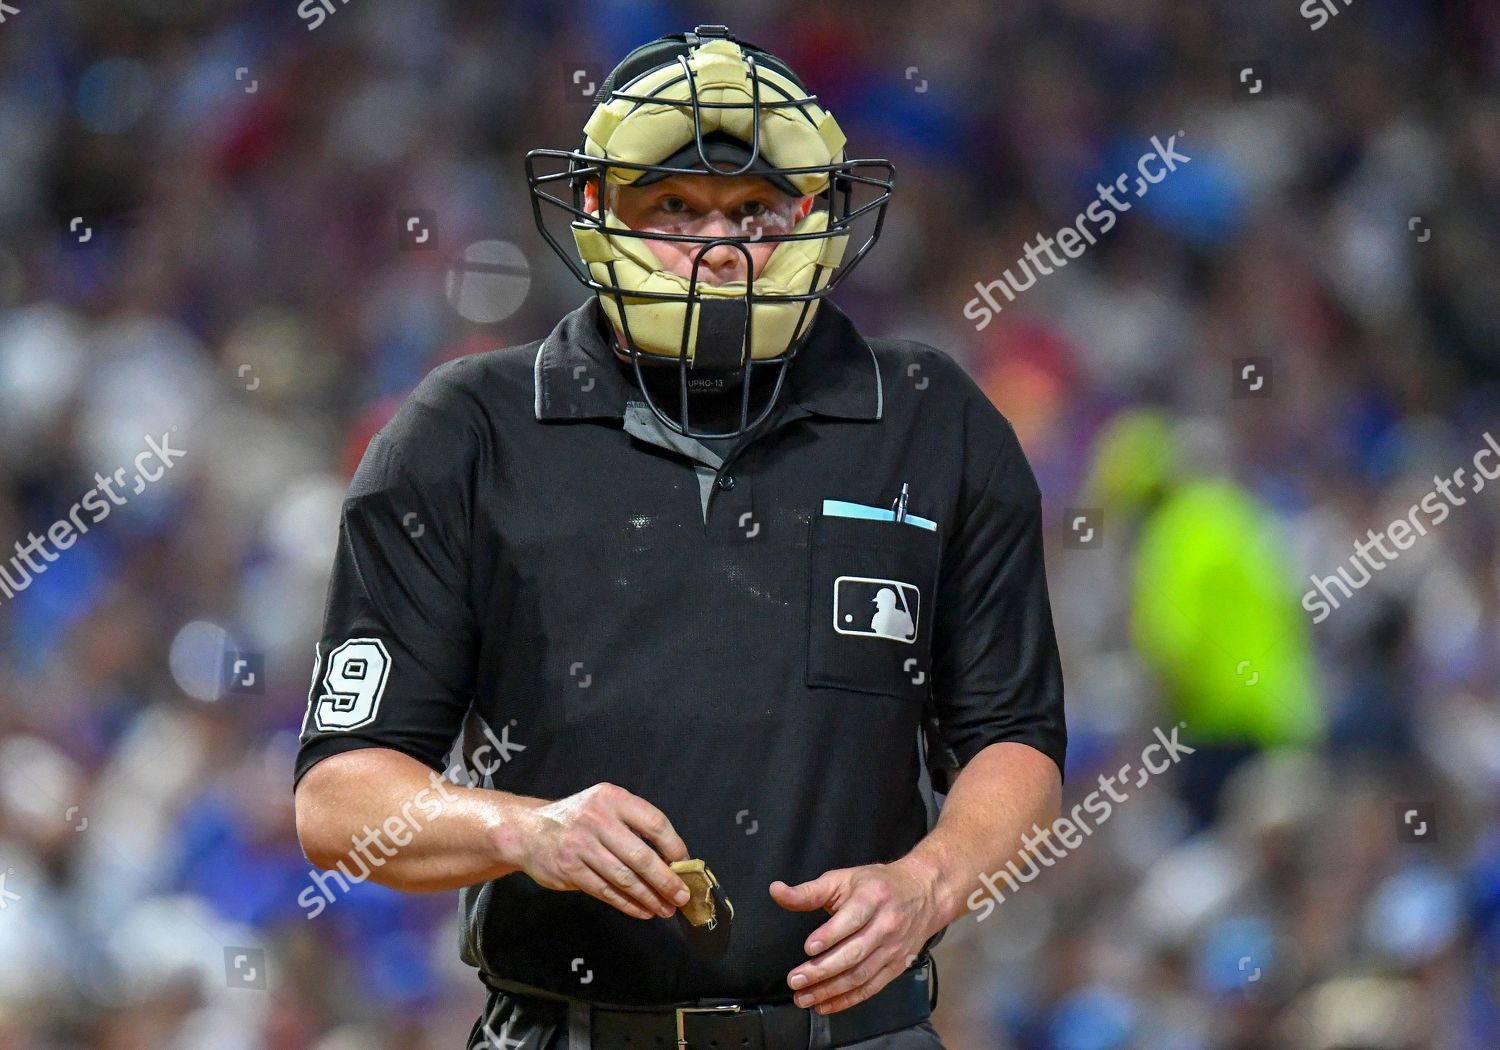 Mlb Home Plate Umpire Sean Barber Editorial Stock Photo - Stock Image